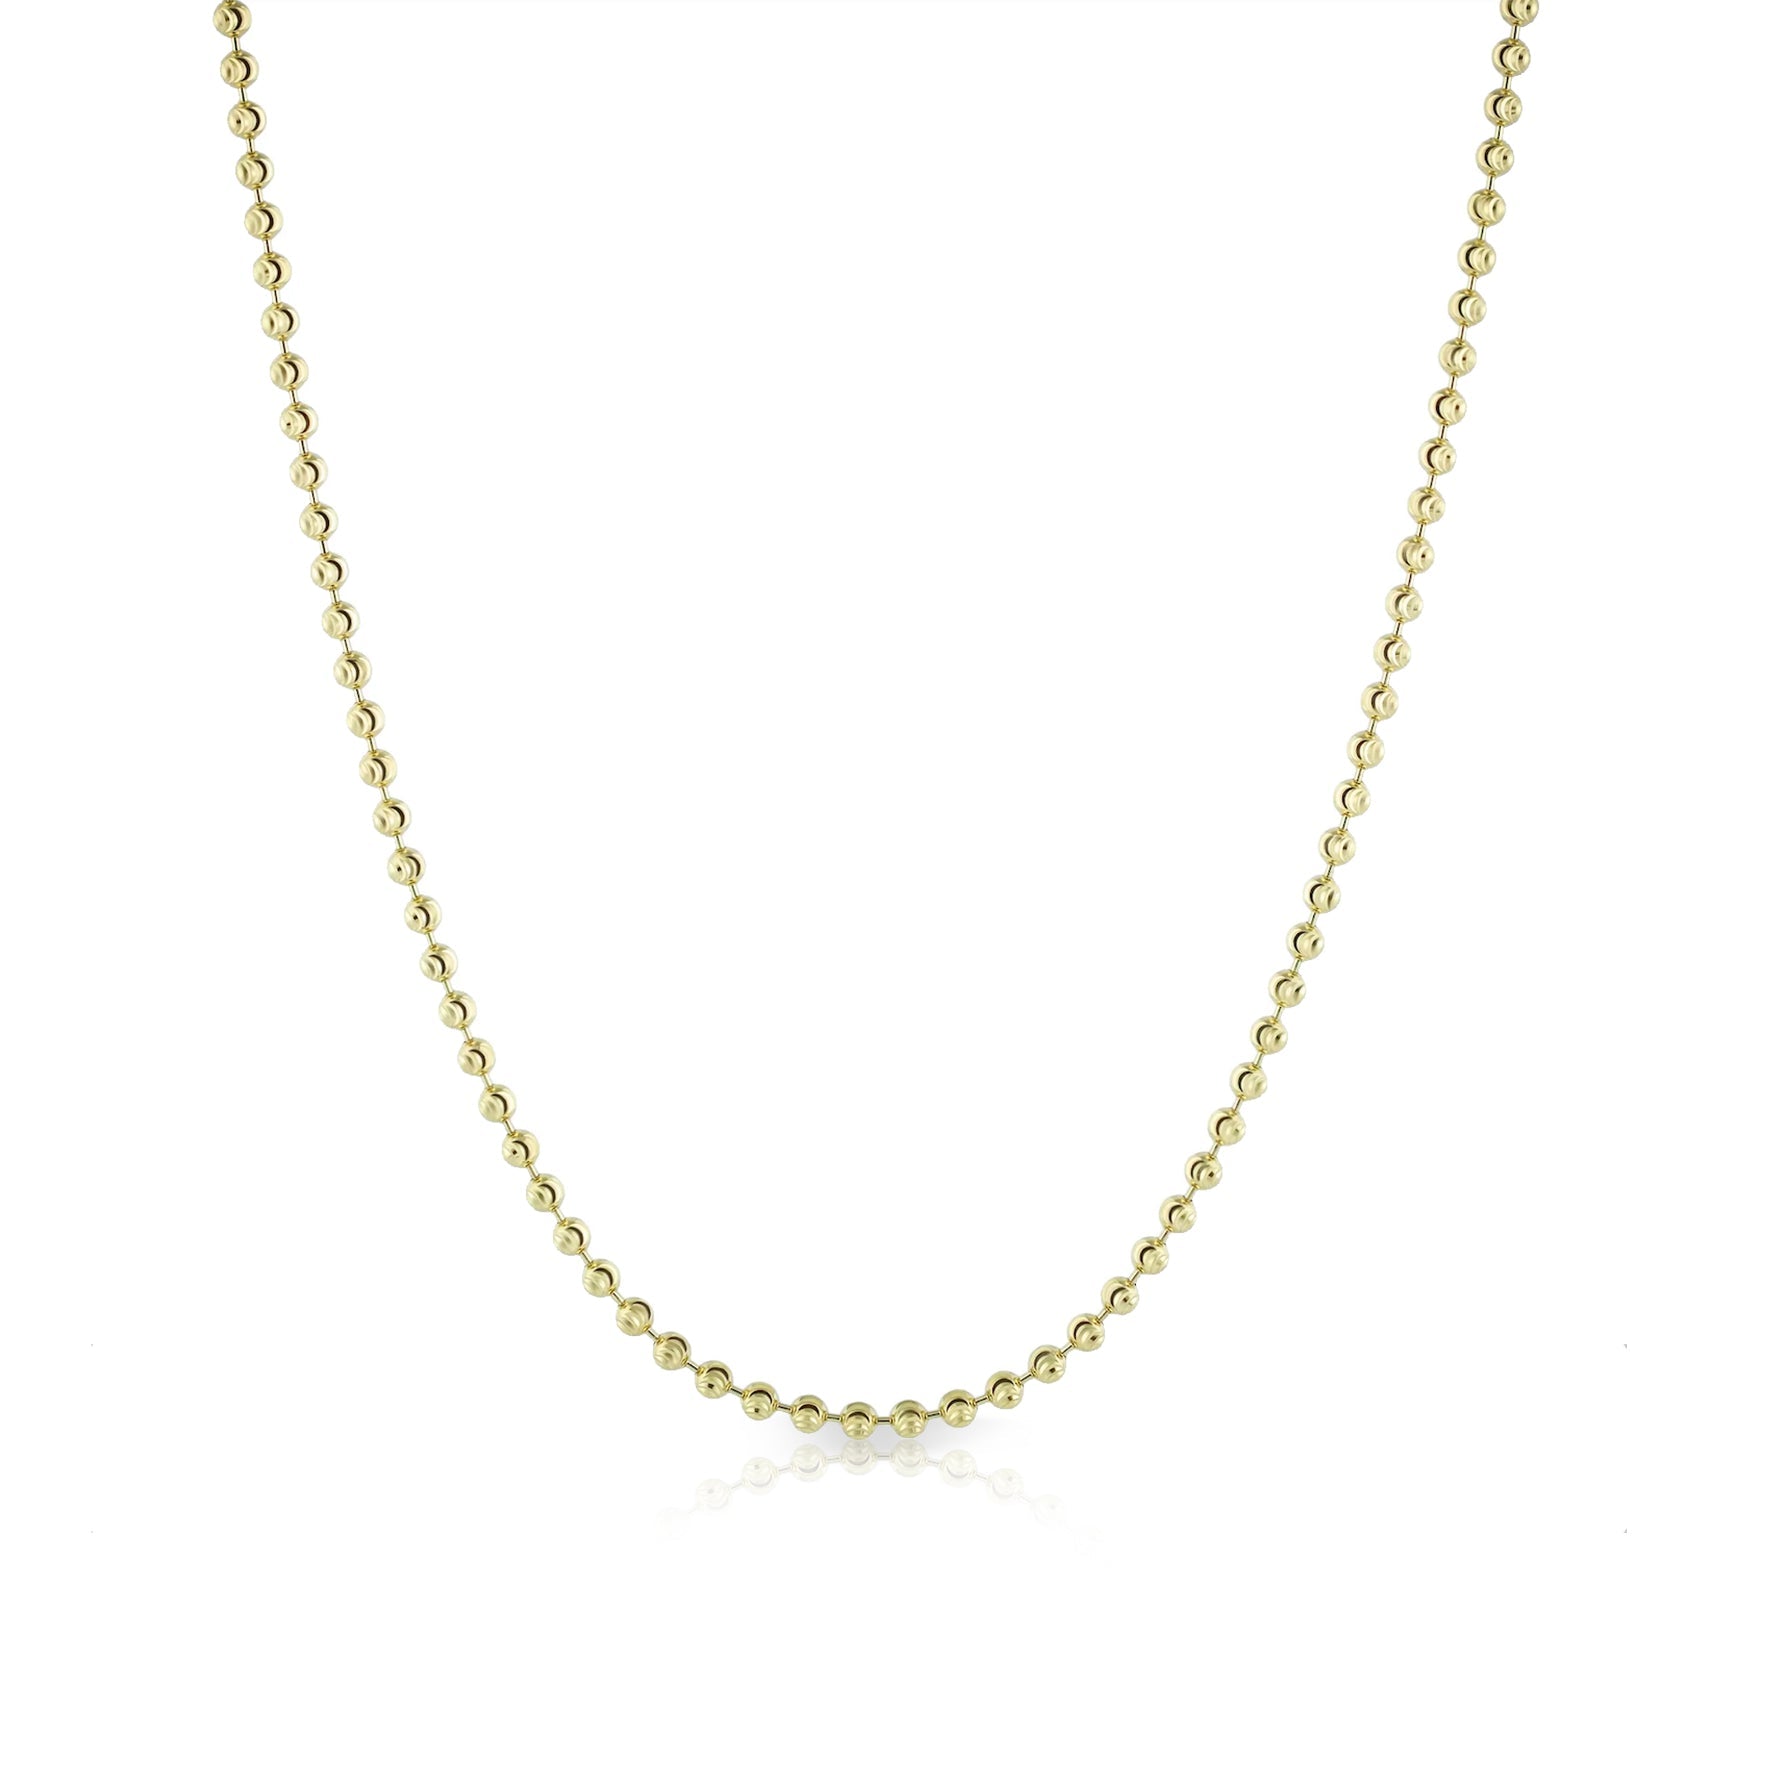 14k 2mm Ball Chain Necklace by S.Carter Designs